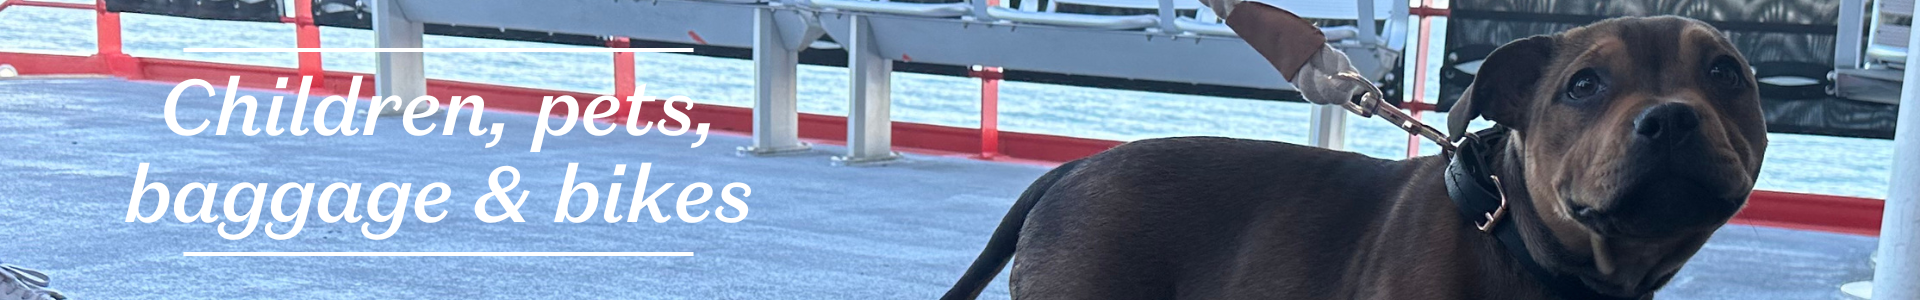 We welcome dogs on board the ferries 